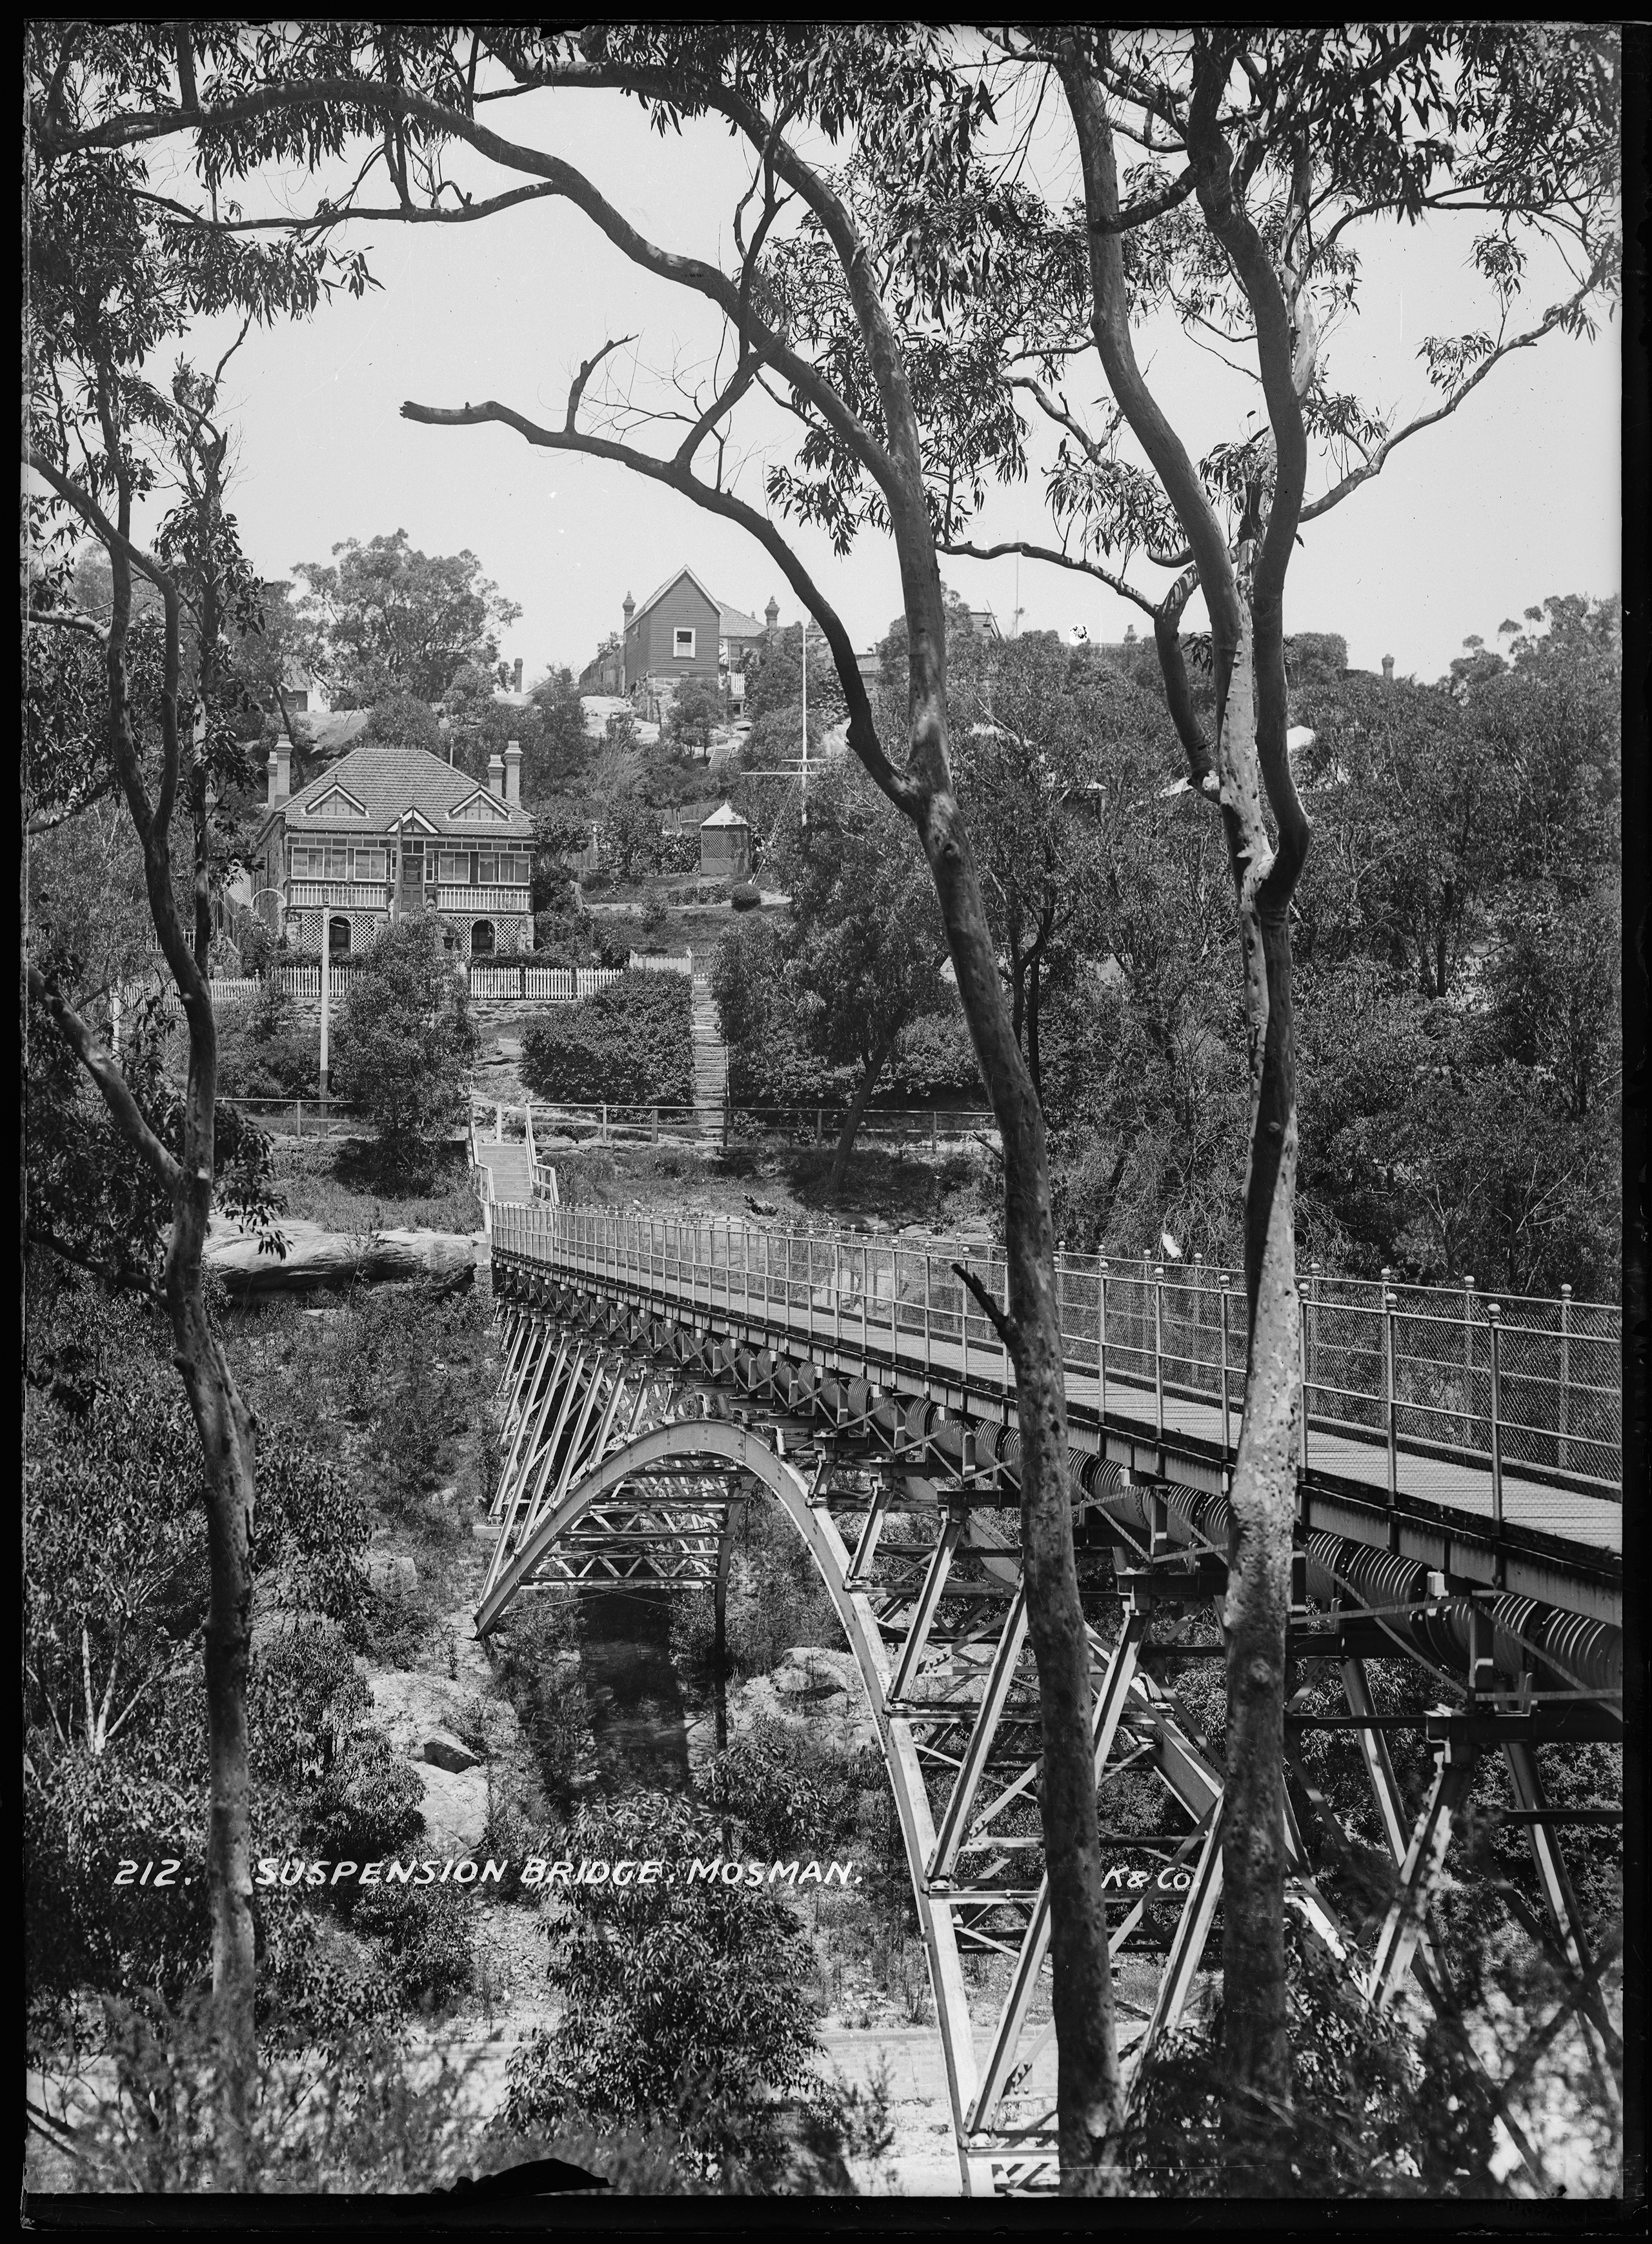 'Suspension bridge, Mosman' by Kerry and Co from the Tyrrell collection